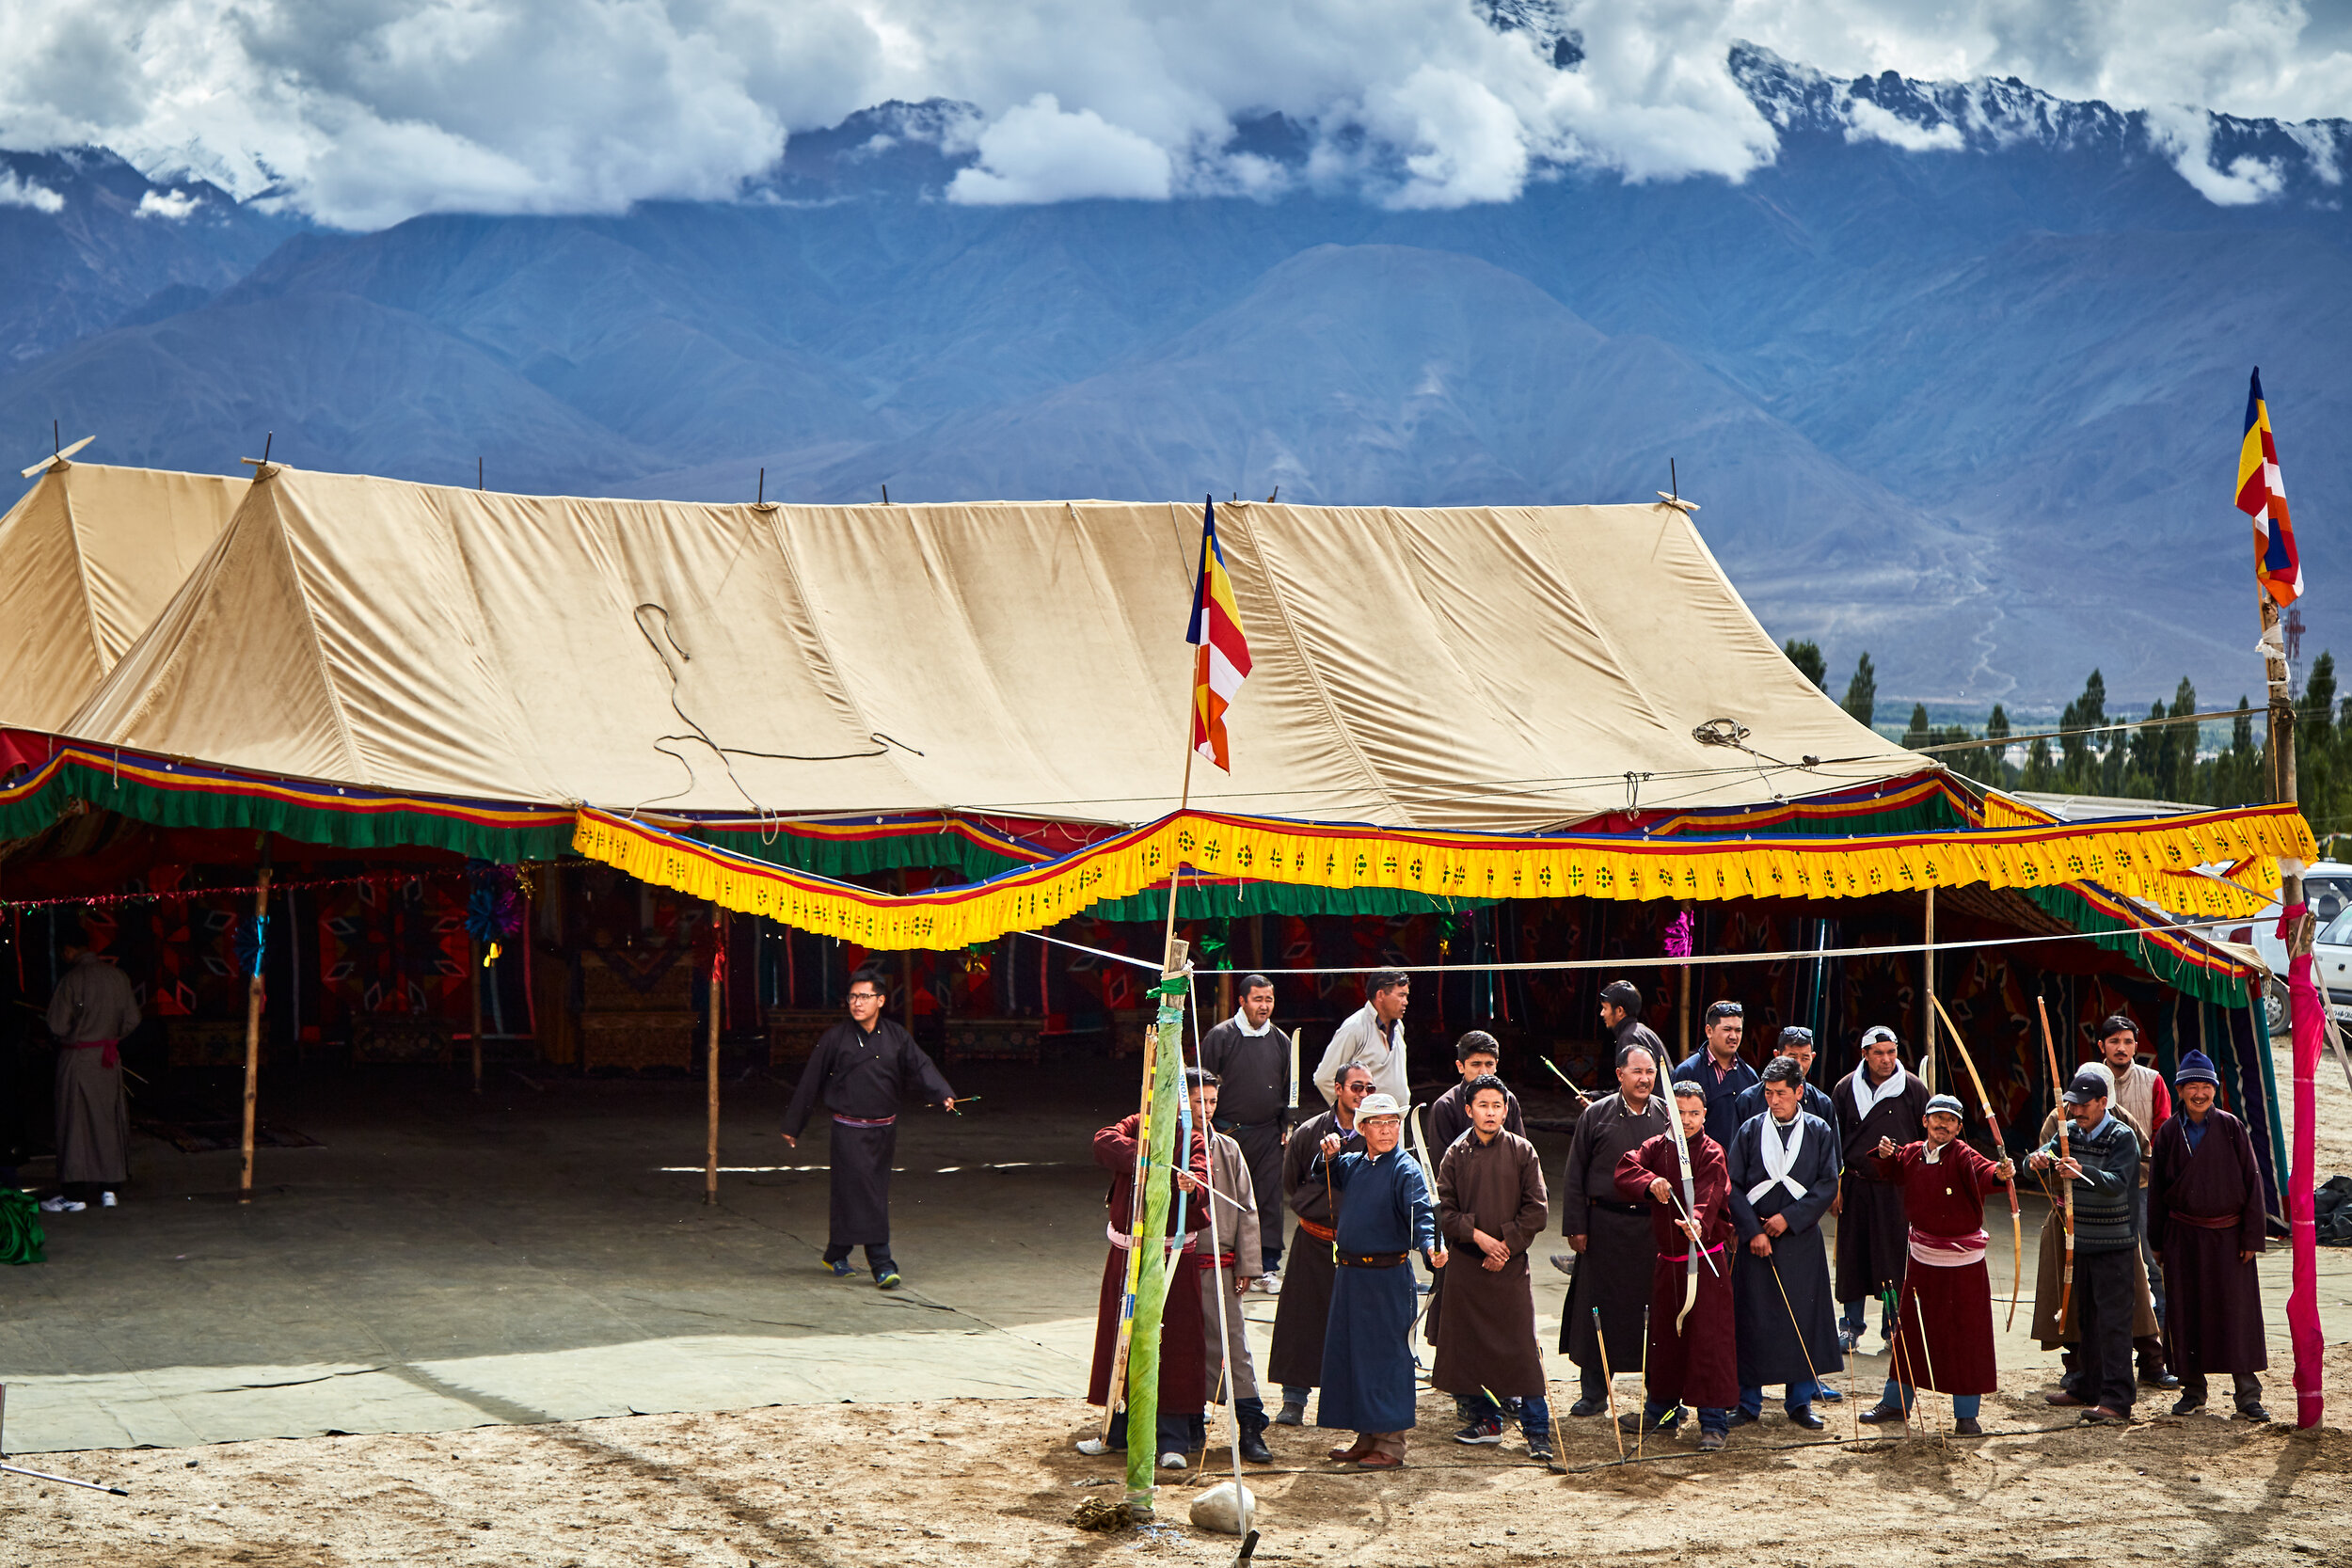  A group of men participating in an archery competition in Leh during a local festival. 